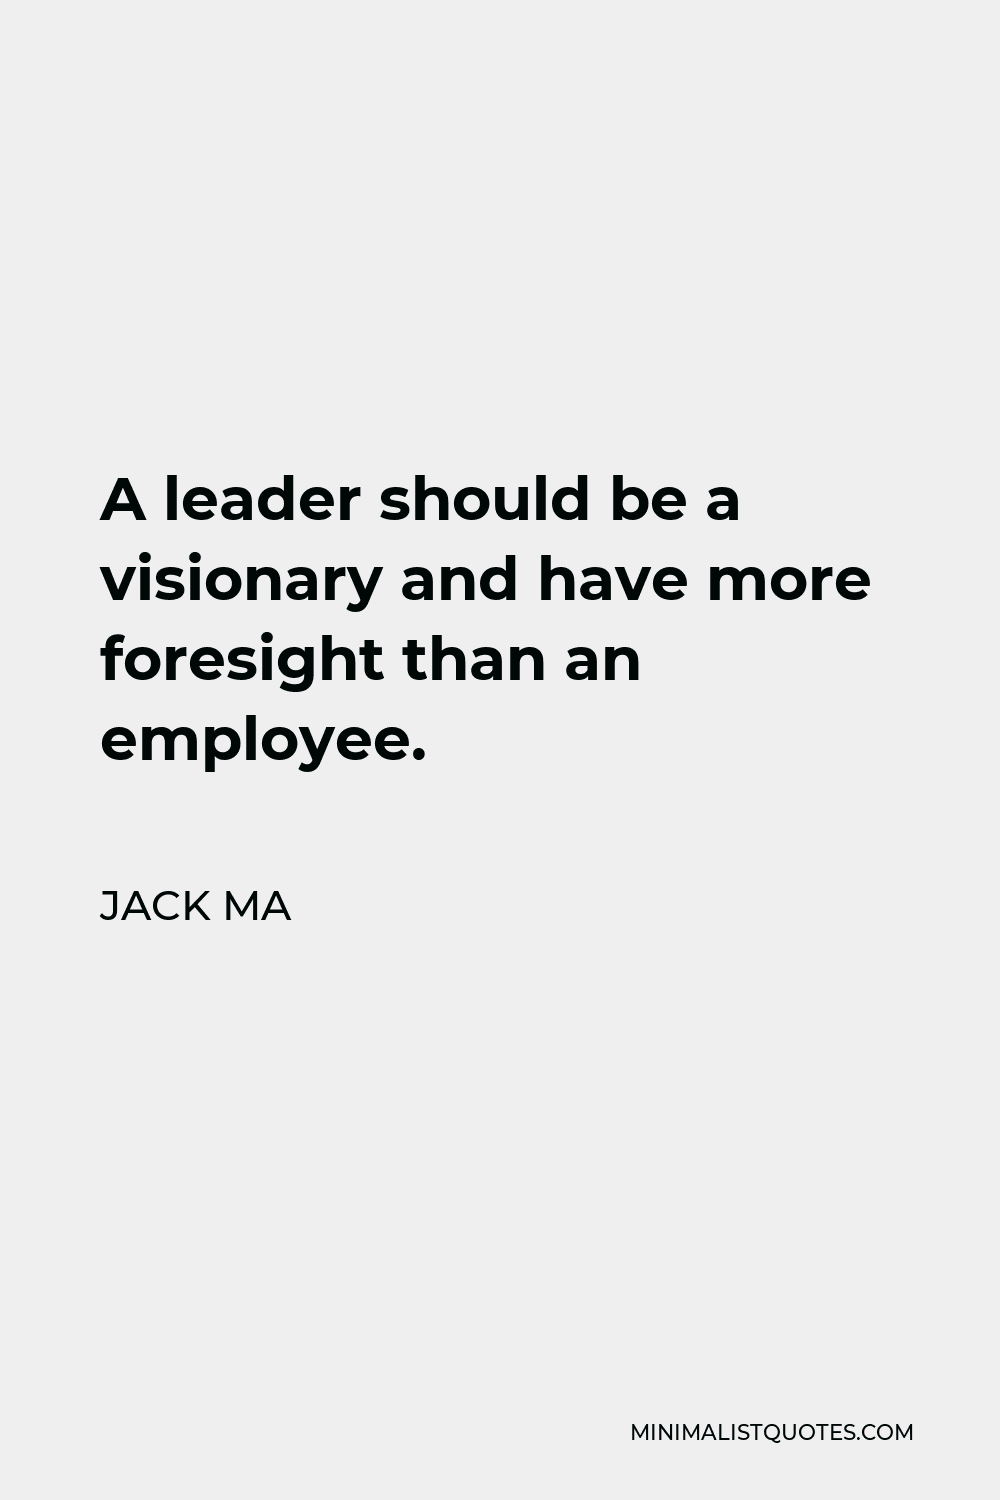 Jack Ma Quote - A leader should be a visionary and have more foresight than an employee.